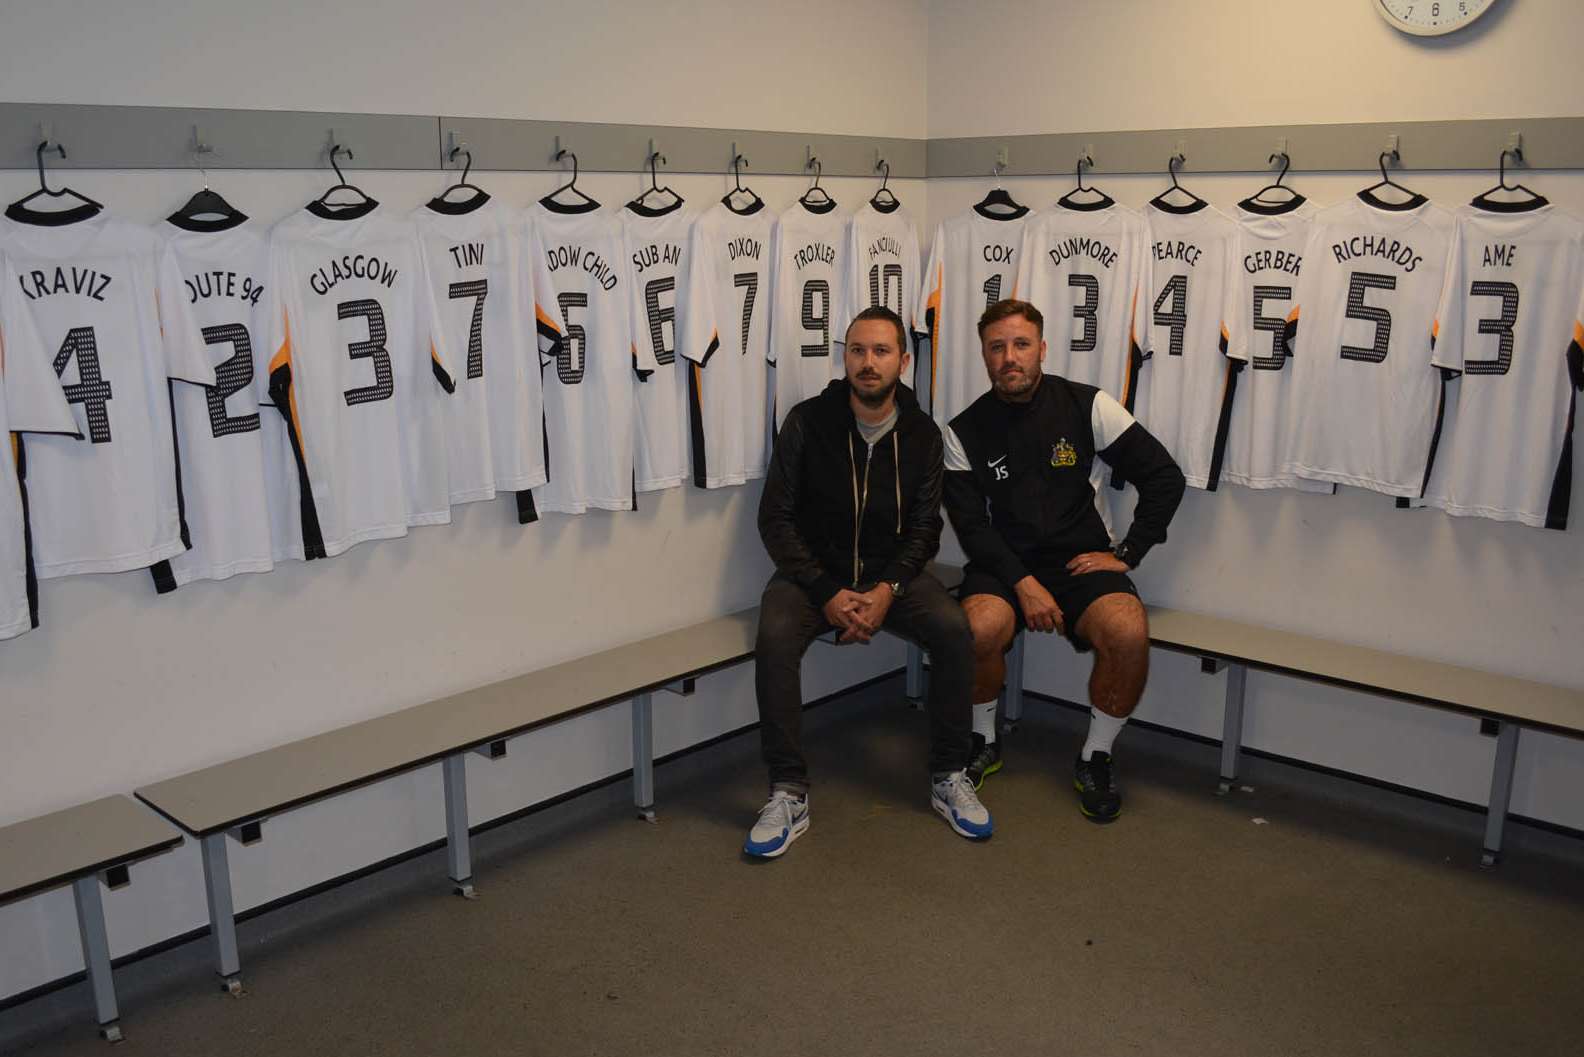 Organiser Nic Fanciulli with the manager of Maidstone United Football Club, Jay Saunders.